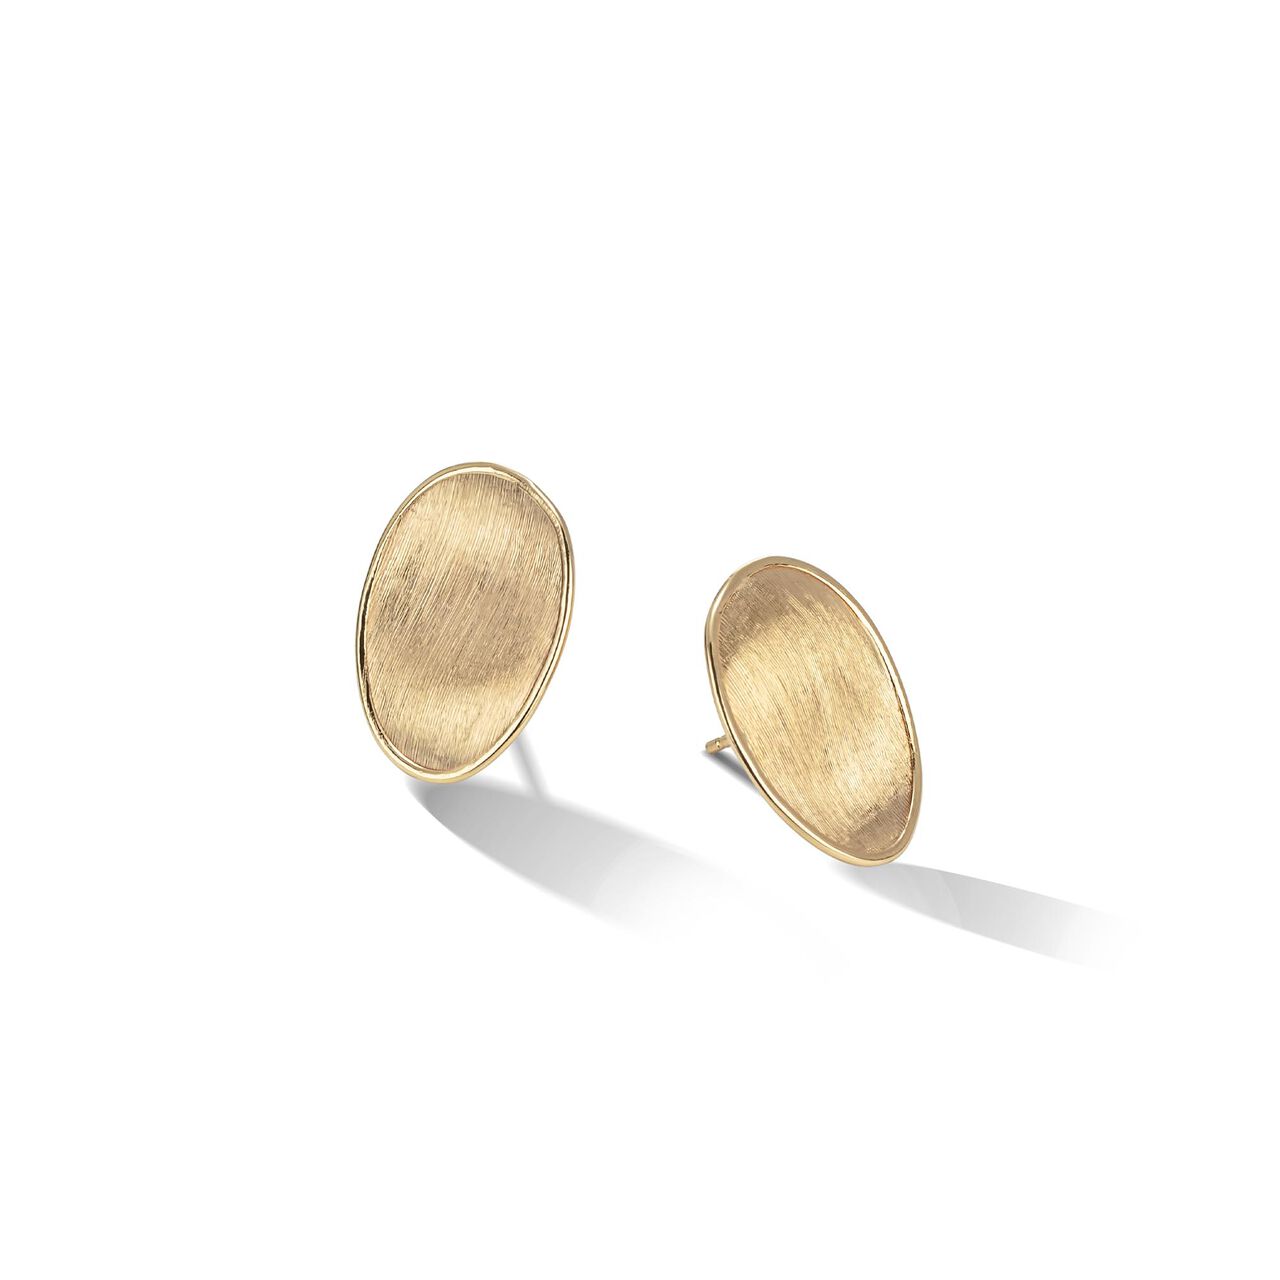 maison birks marco bicego lunaria collection medium model yellow gold stud earrings ob1342 y 02 image number 0